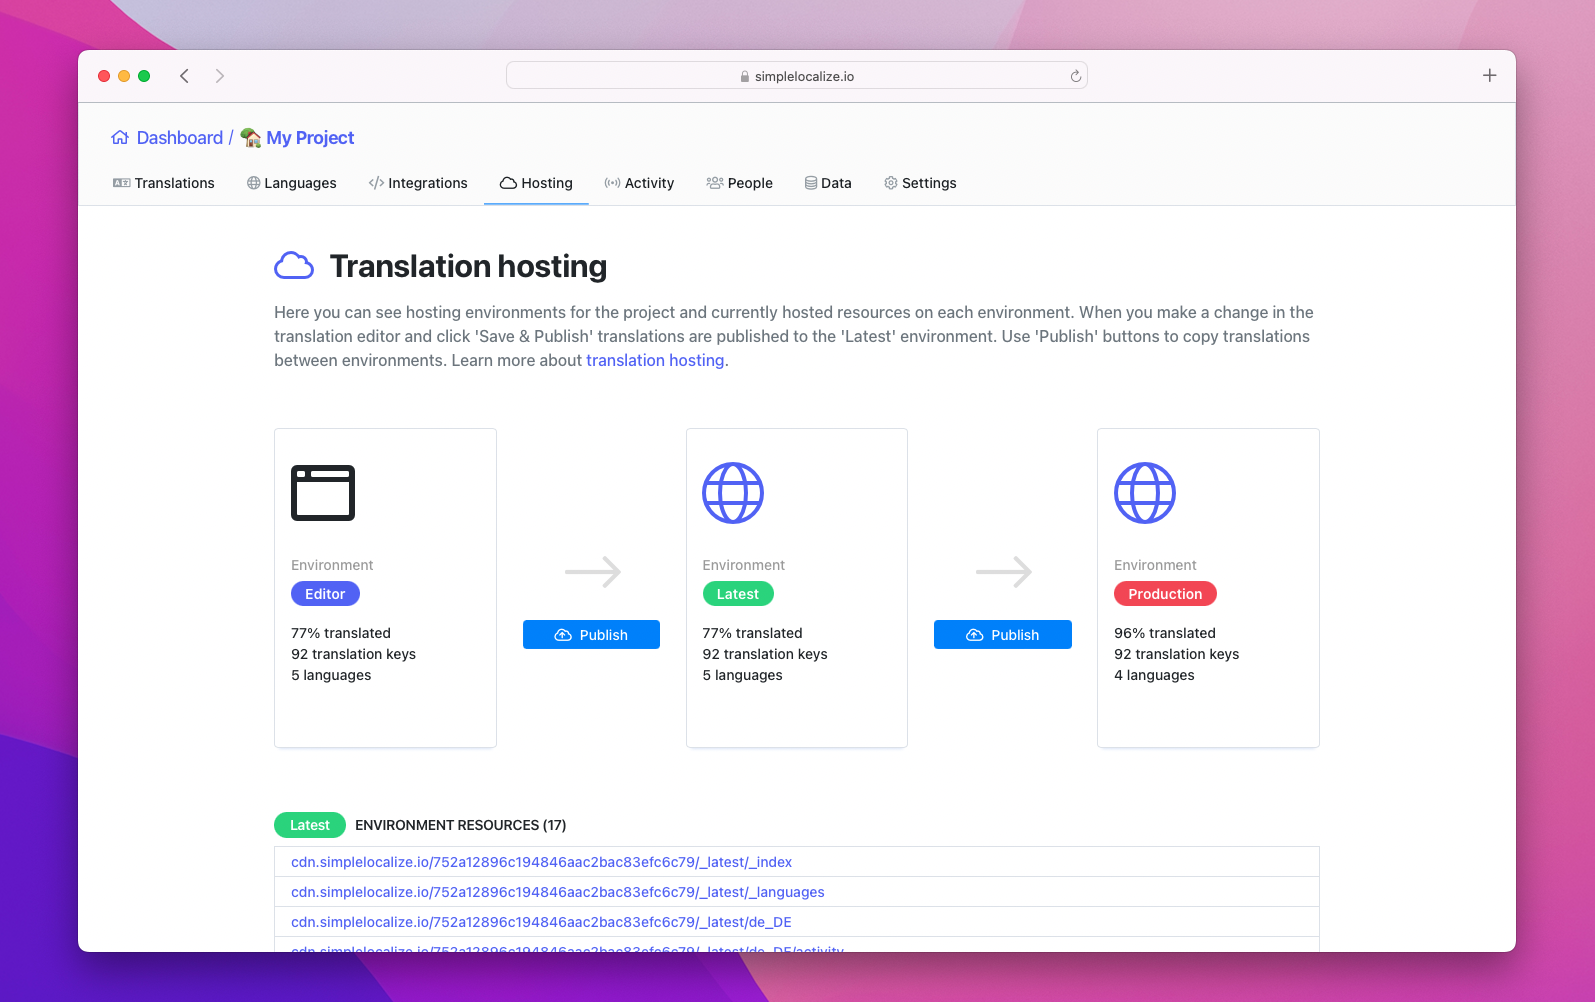 view of translation hosting environments and files